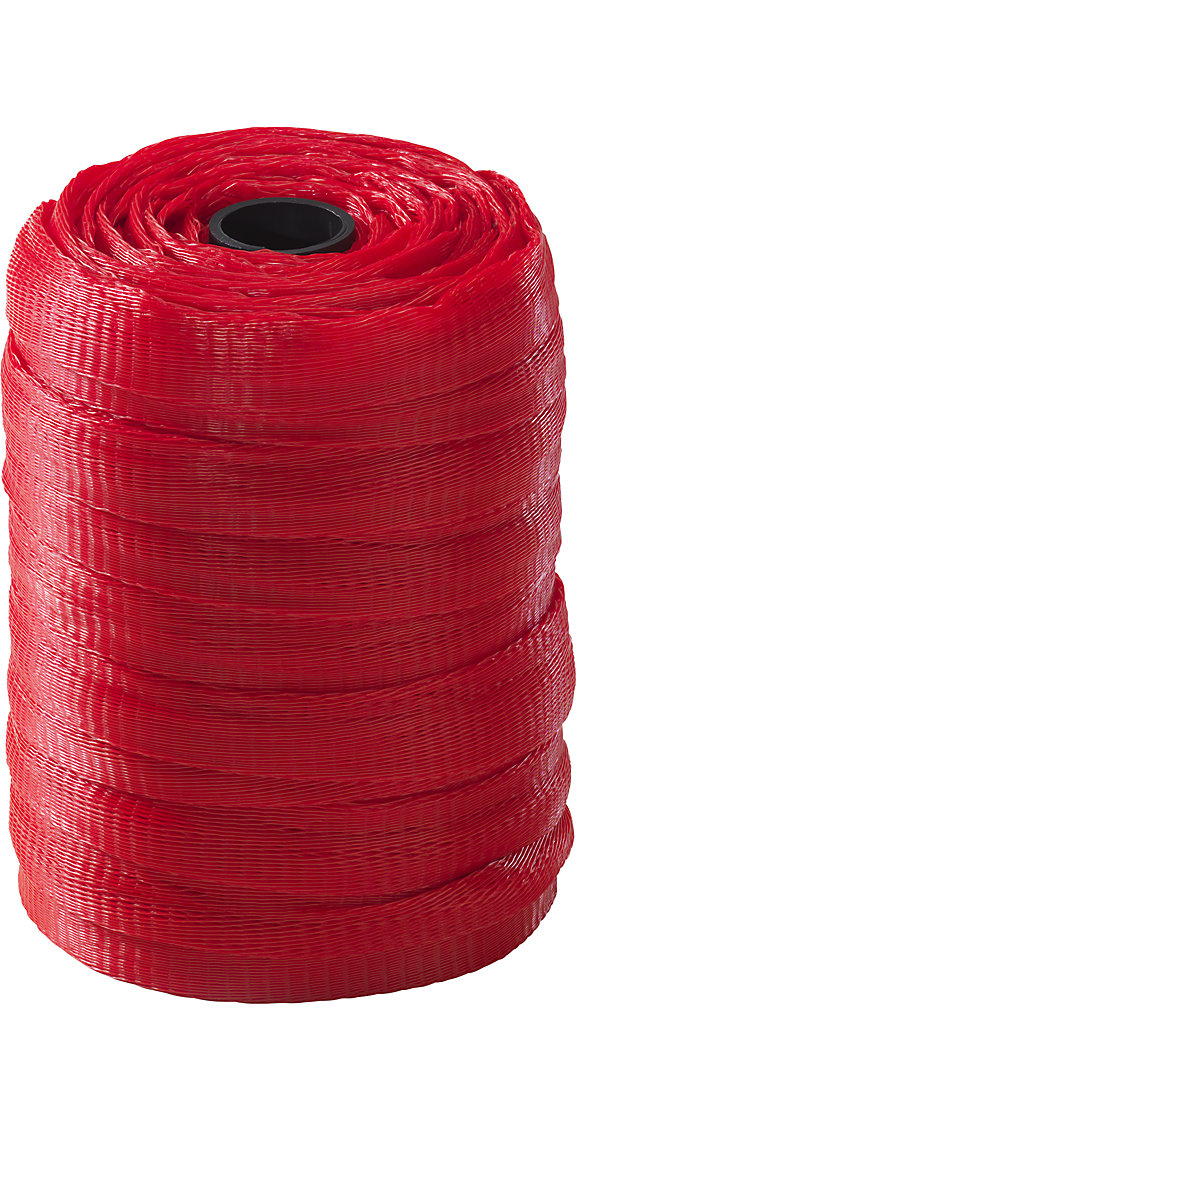 Surface protection net, polyethylene, 1 roll, red, for Ø 50 – 100 mm